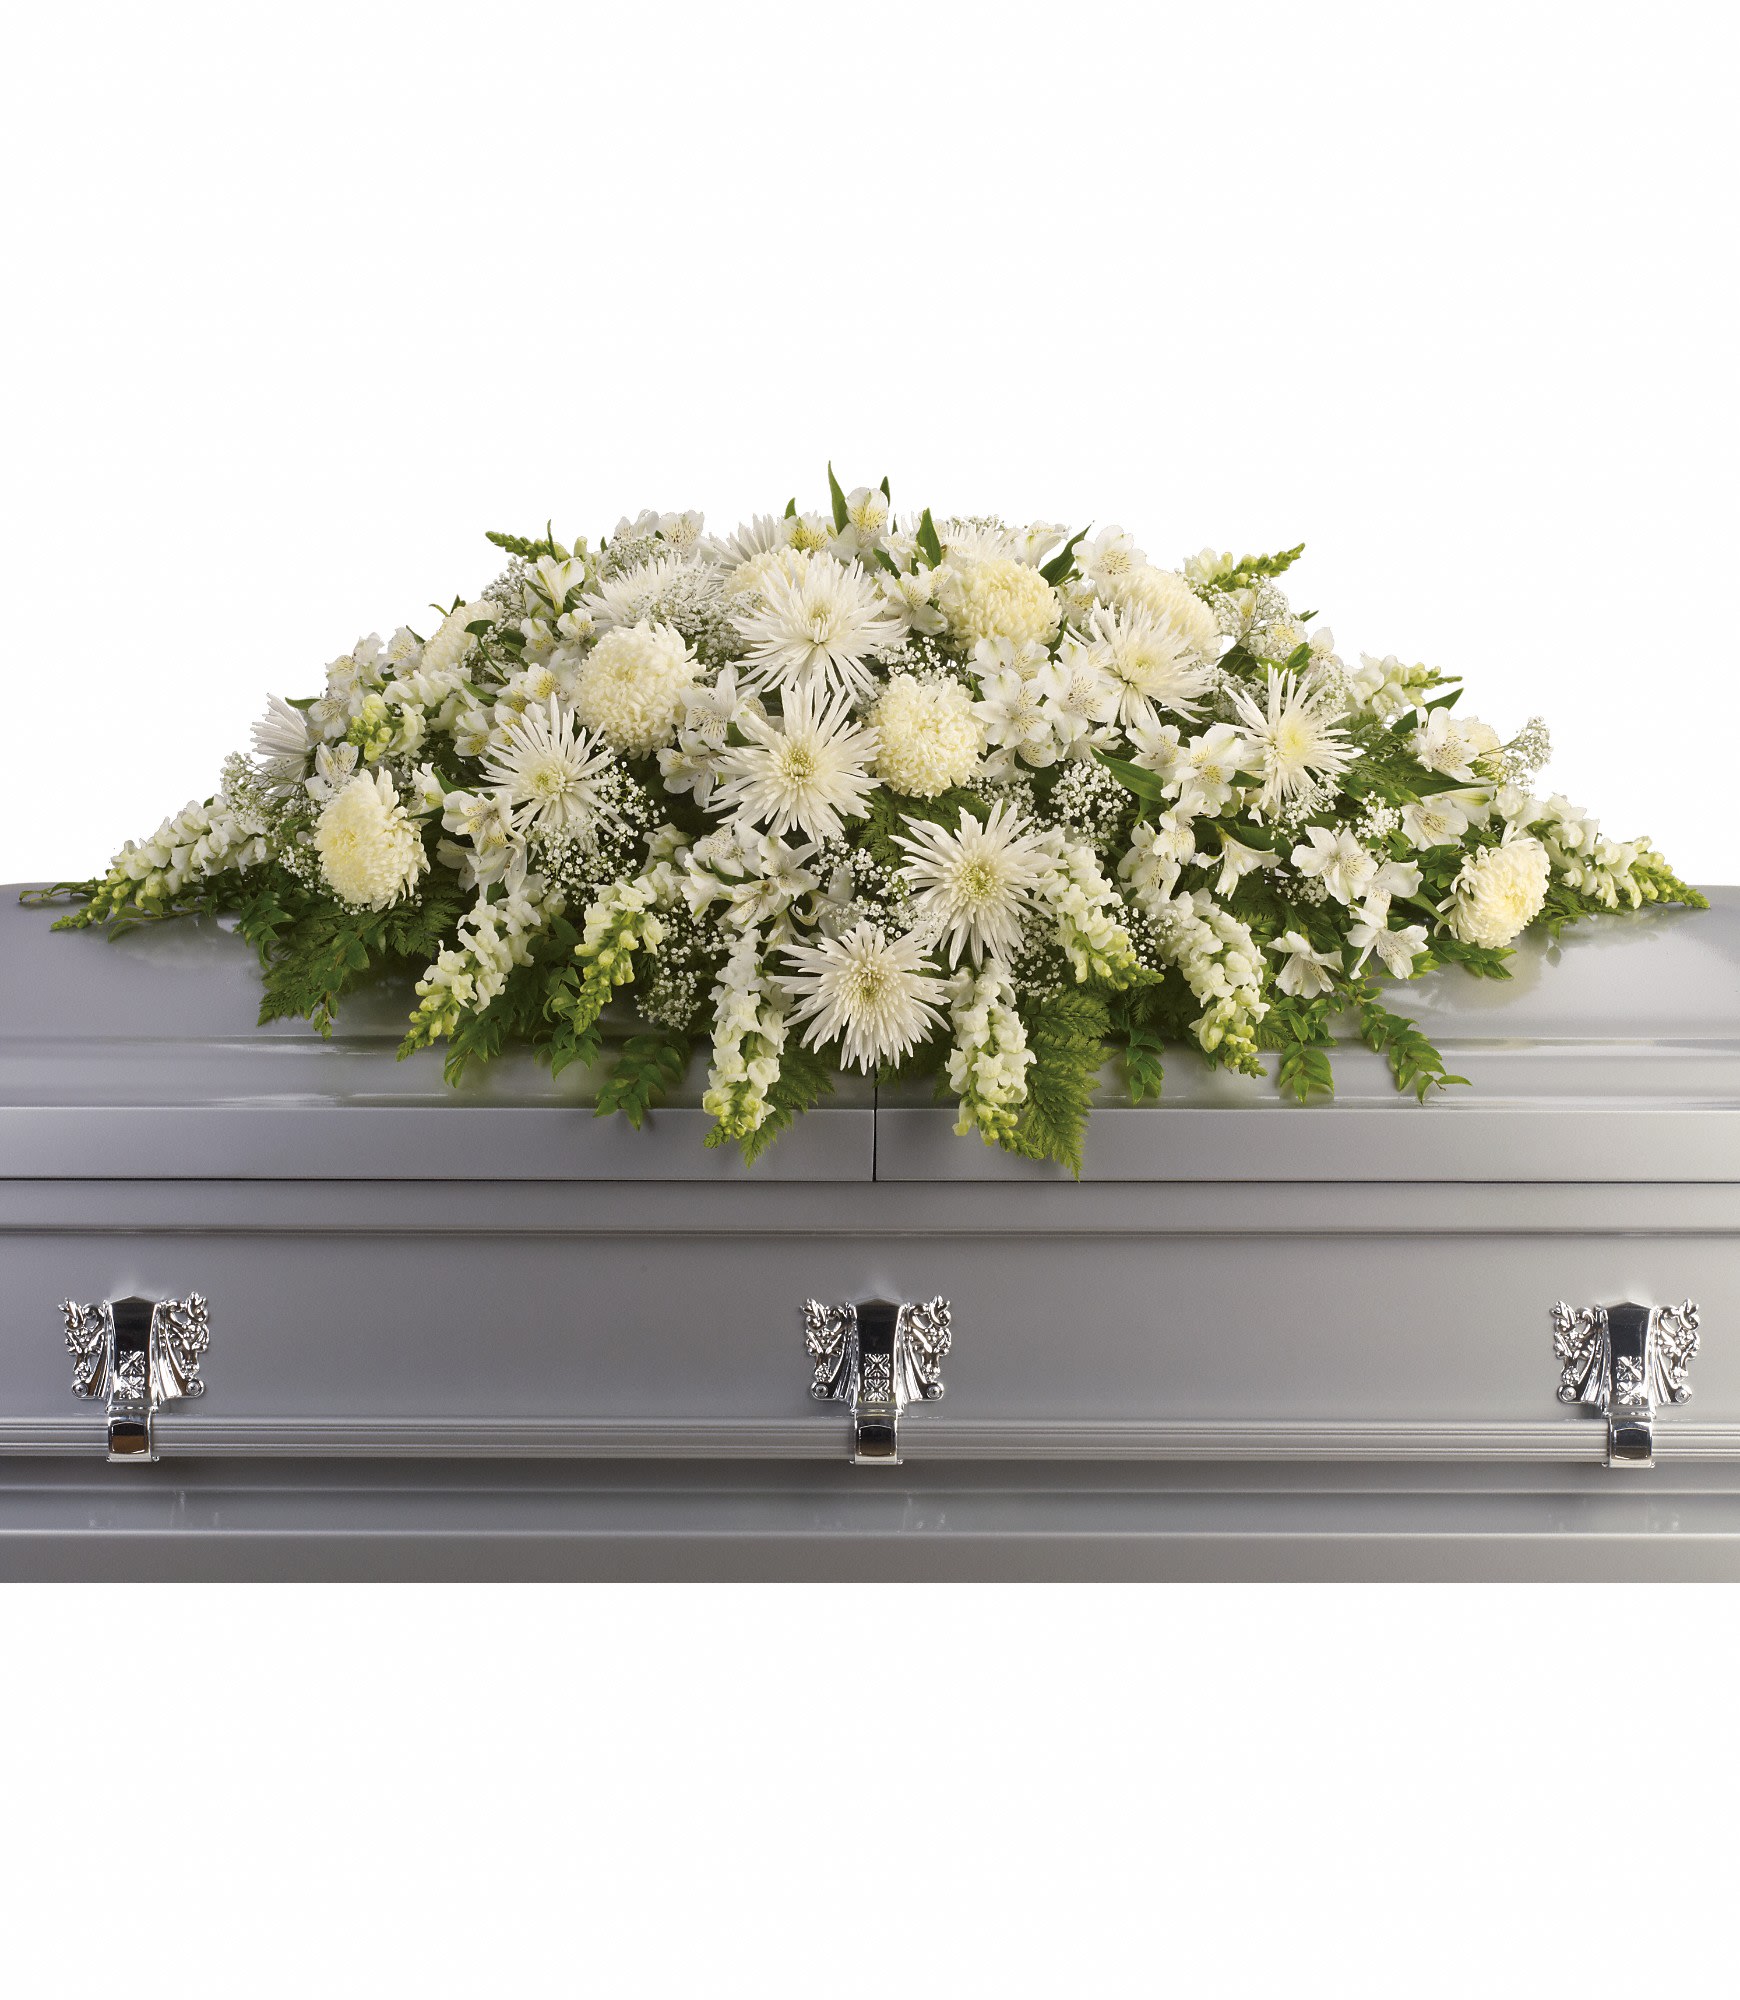 Enduring Light Casket Spray - The purity of this all-white casket spray creates an aura of serenity and peace - a beautifully memorable final farewell to a lost loved one. 